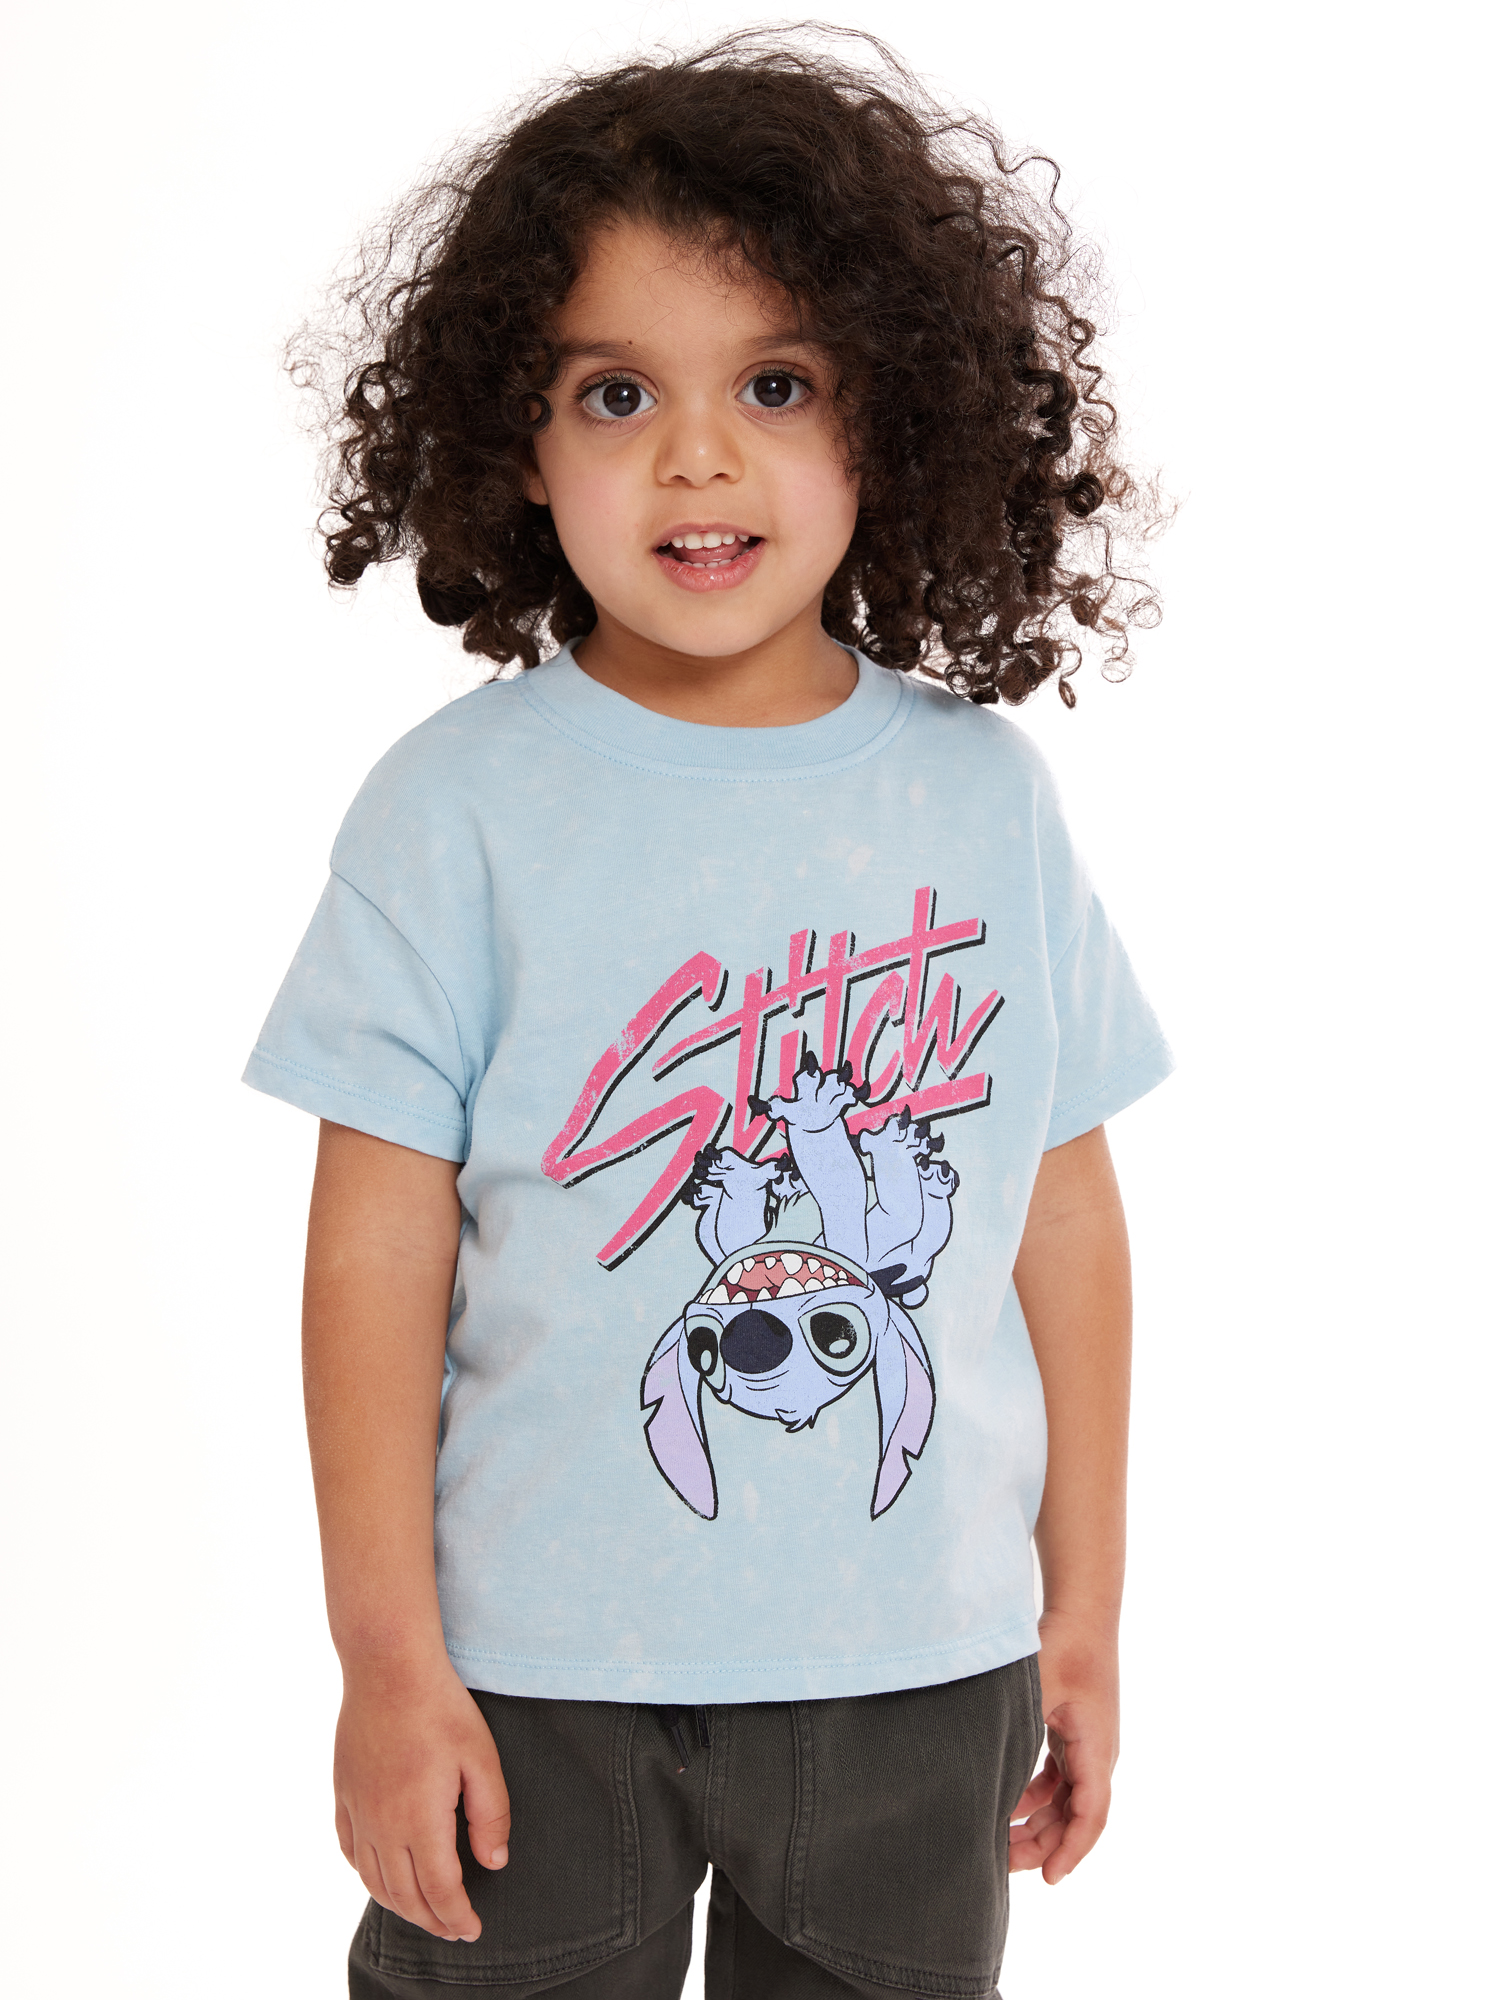 Stitch Toddler Boy Graphic Tees, 2-Pack, Sizes 2T-5T - image 3 of 8